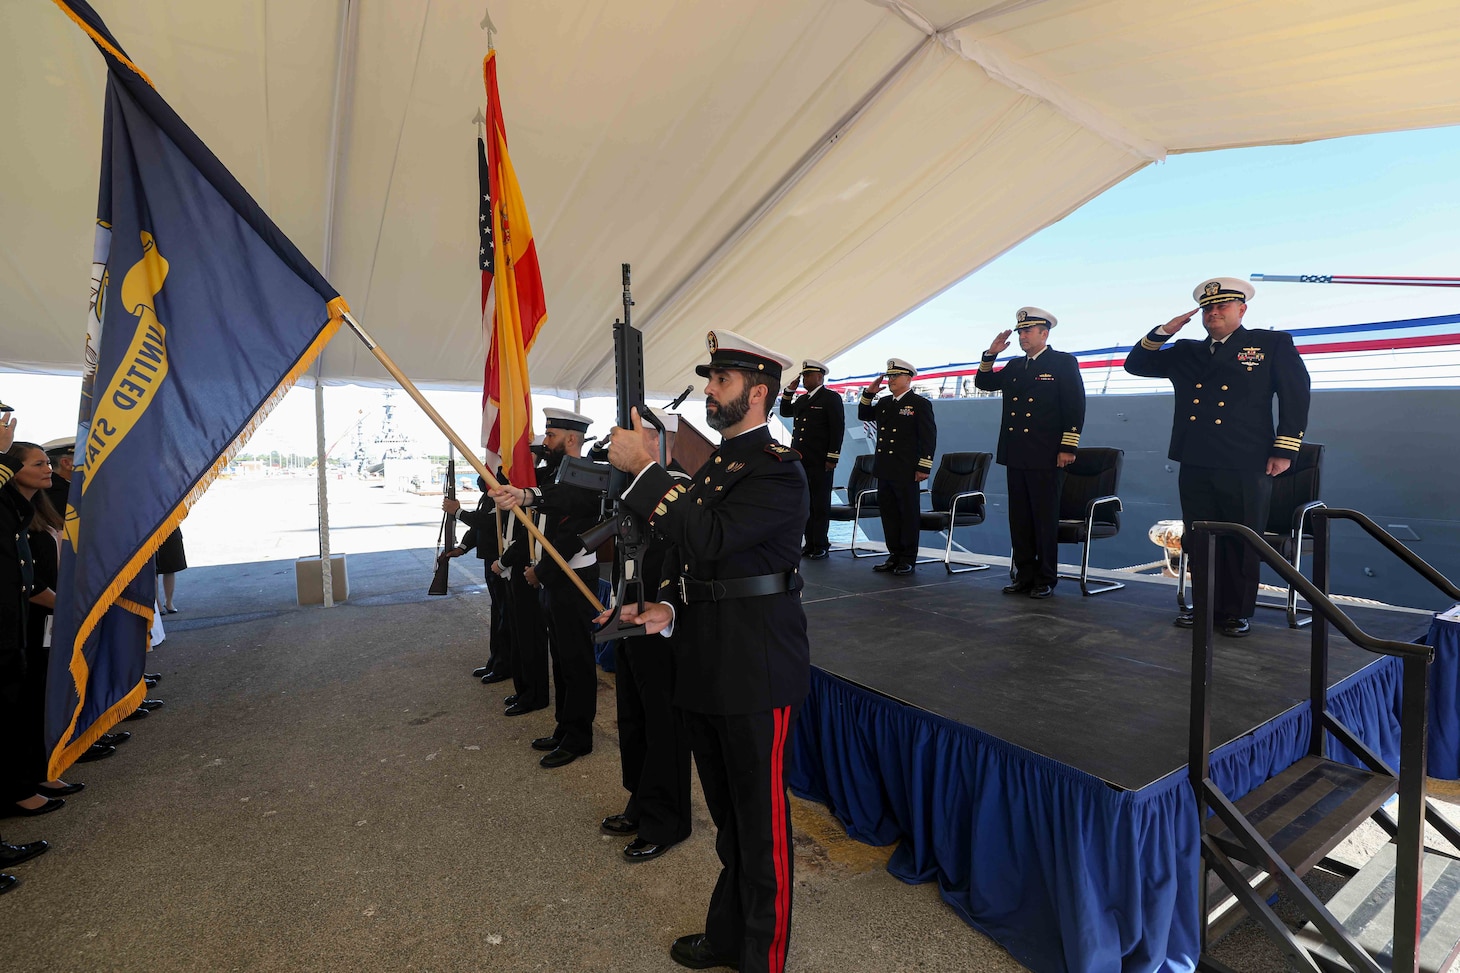 Ceremony > U.S. Naval of / USS Holds Sixth Porter Fleet and News Europe Africa Change U.S. Display > Command Forces